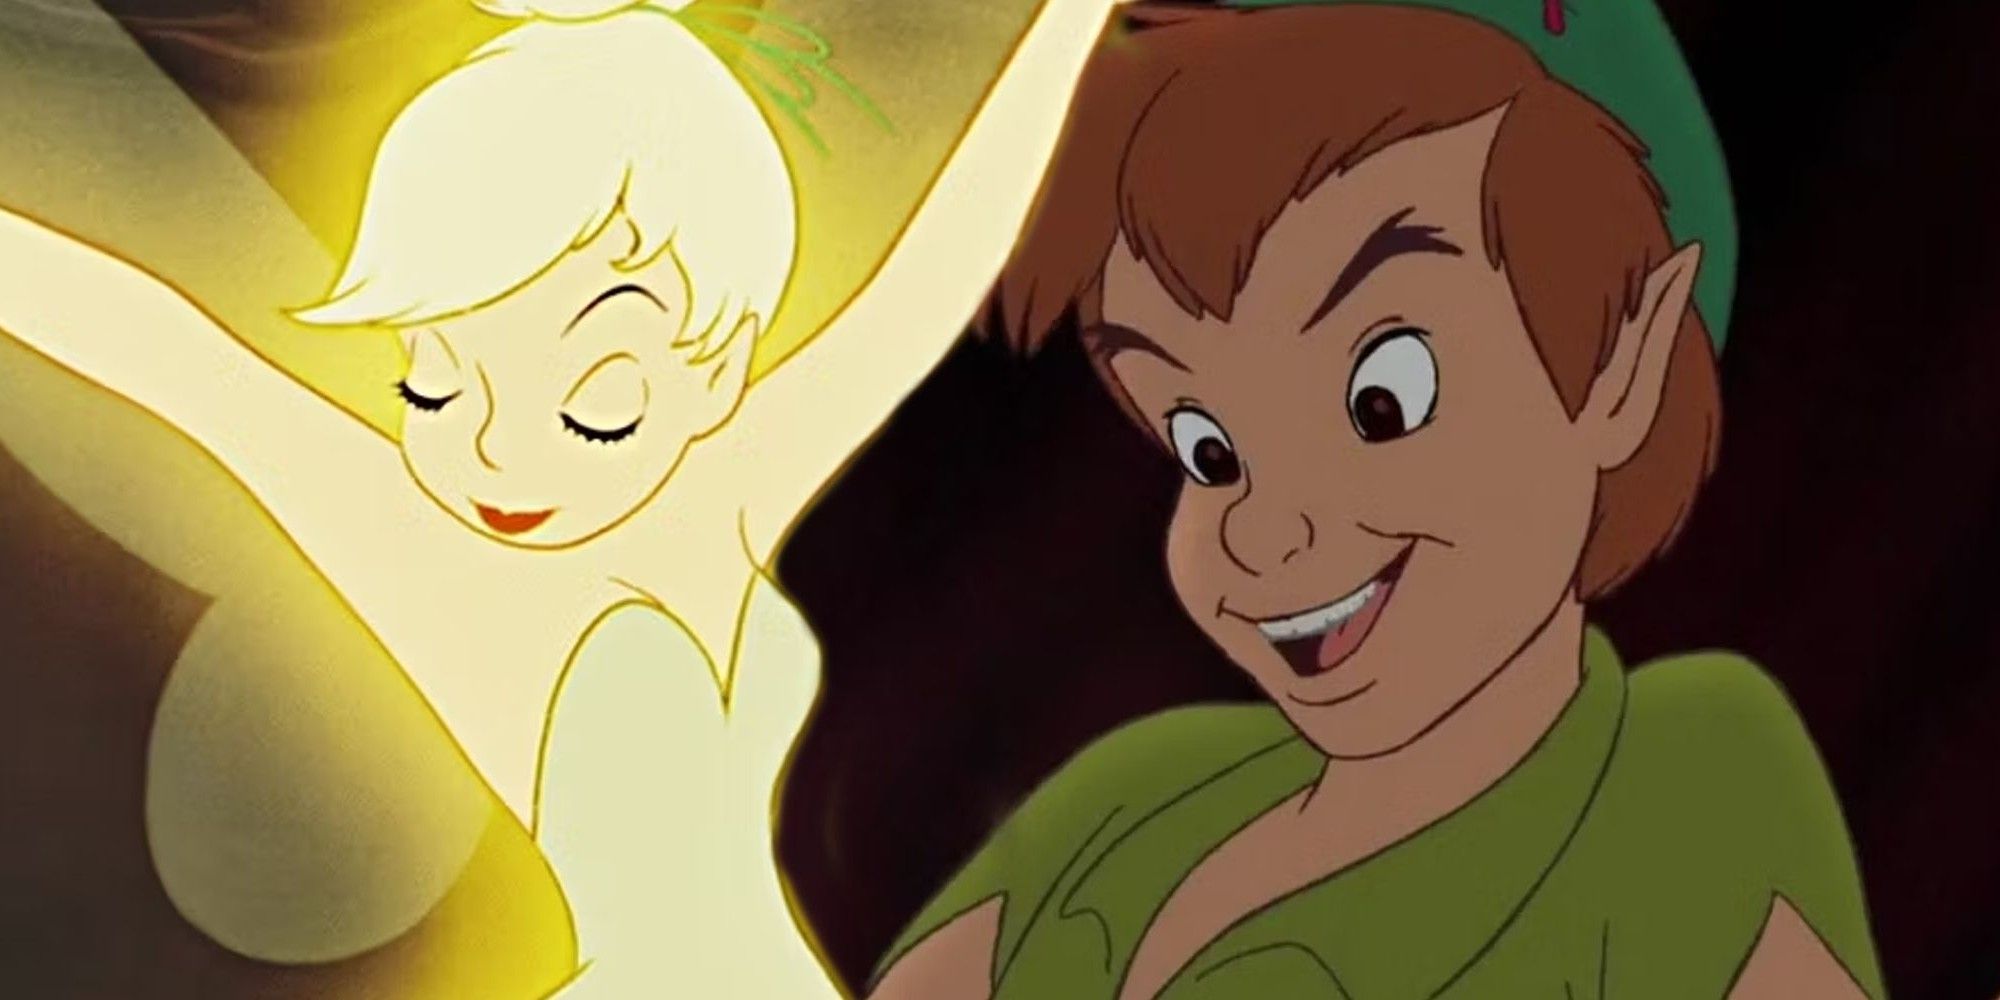 Peter Pan with his arms extended outward and Tinkerbell dancing with her arms up in the Disney animated movie